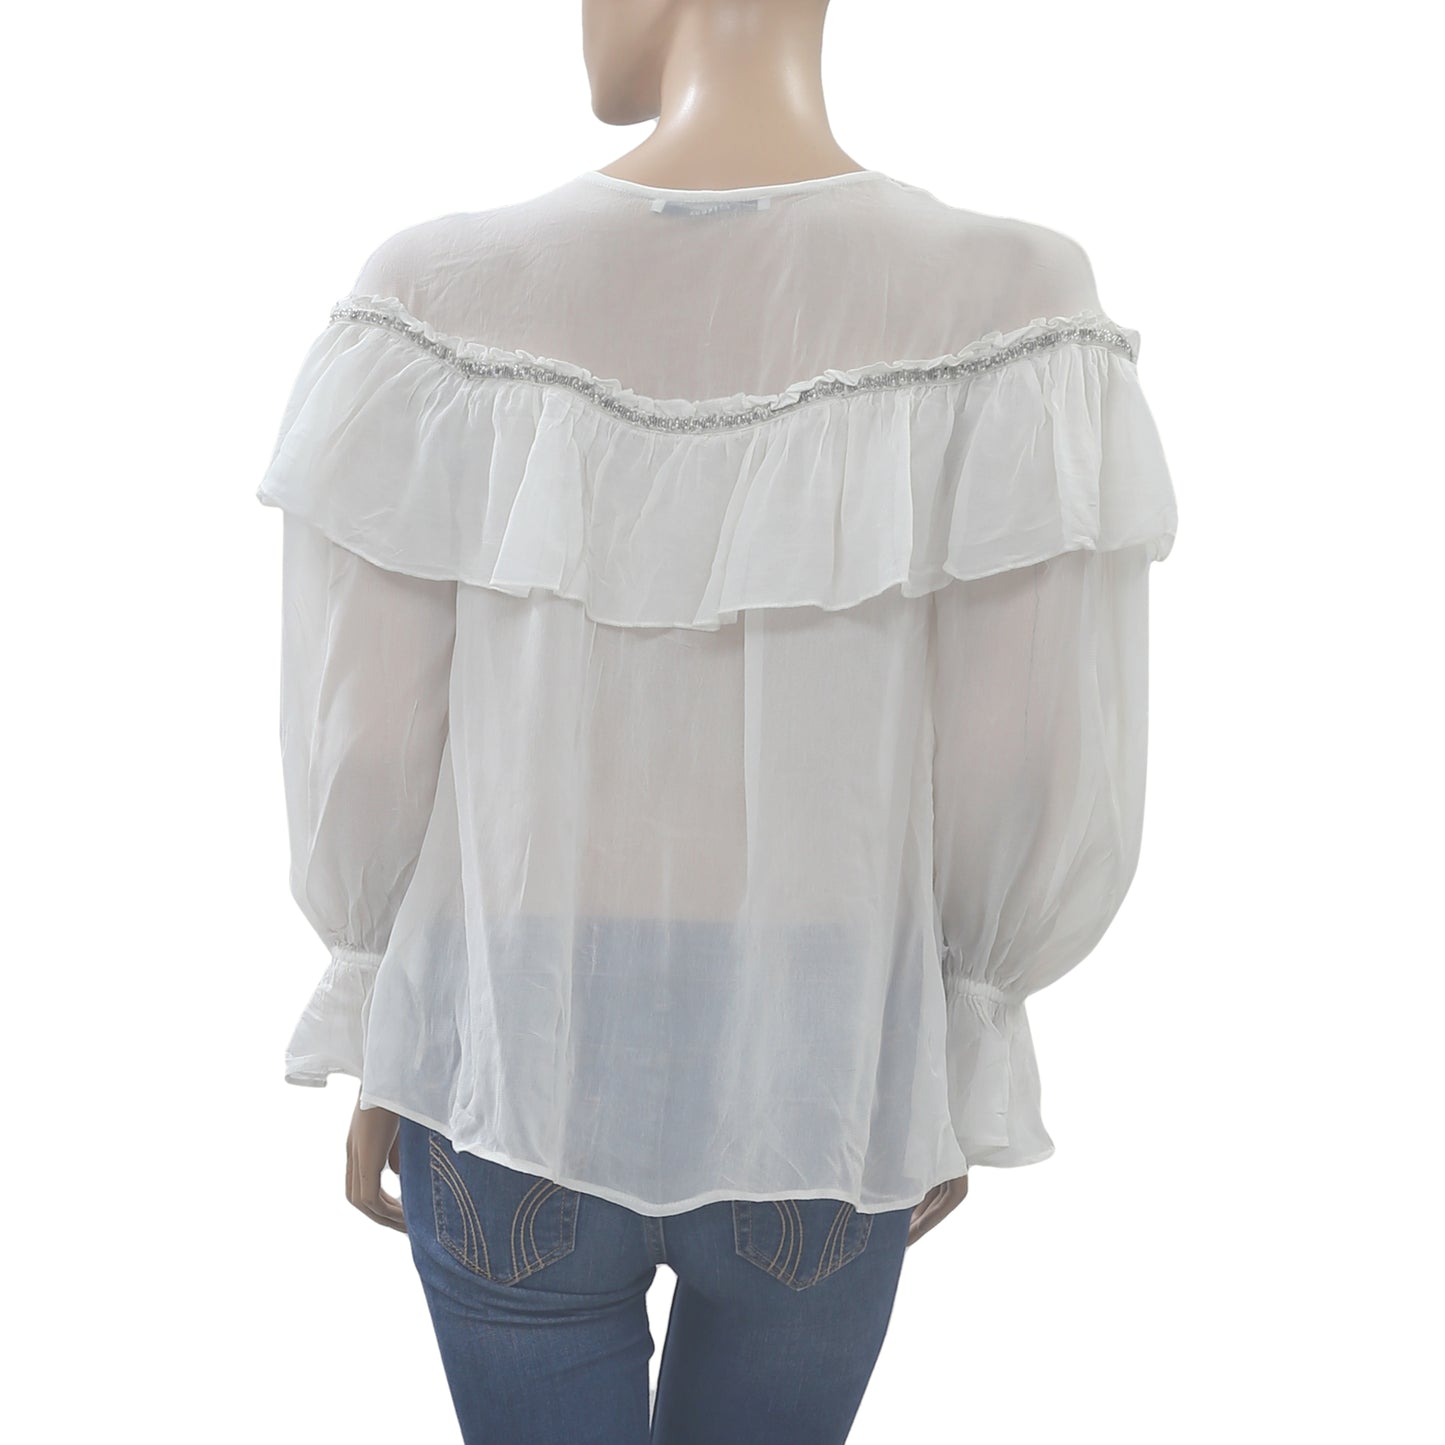 Uterque Embellished Blouse Shirt Top